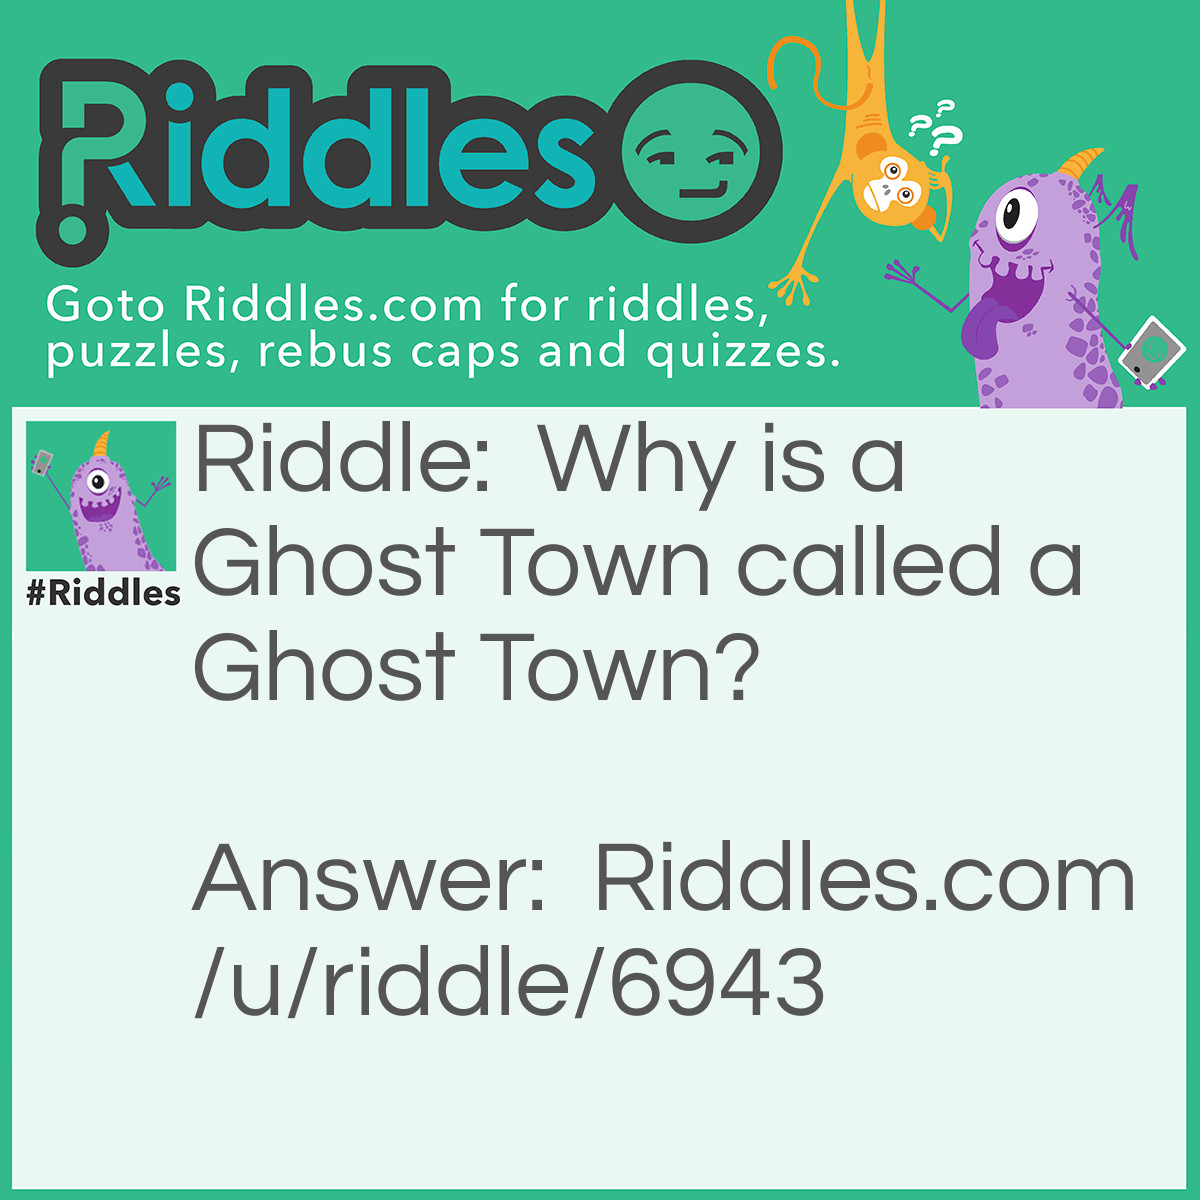 Riddle: Why is a Ghost Town called a Ghost Town? Answer: Because the ghosts couldn't think of a better name to call the town.